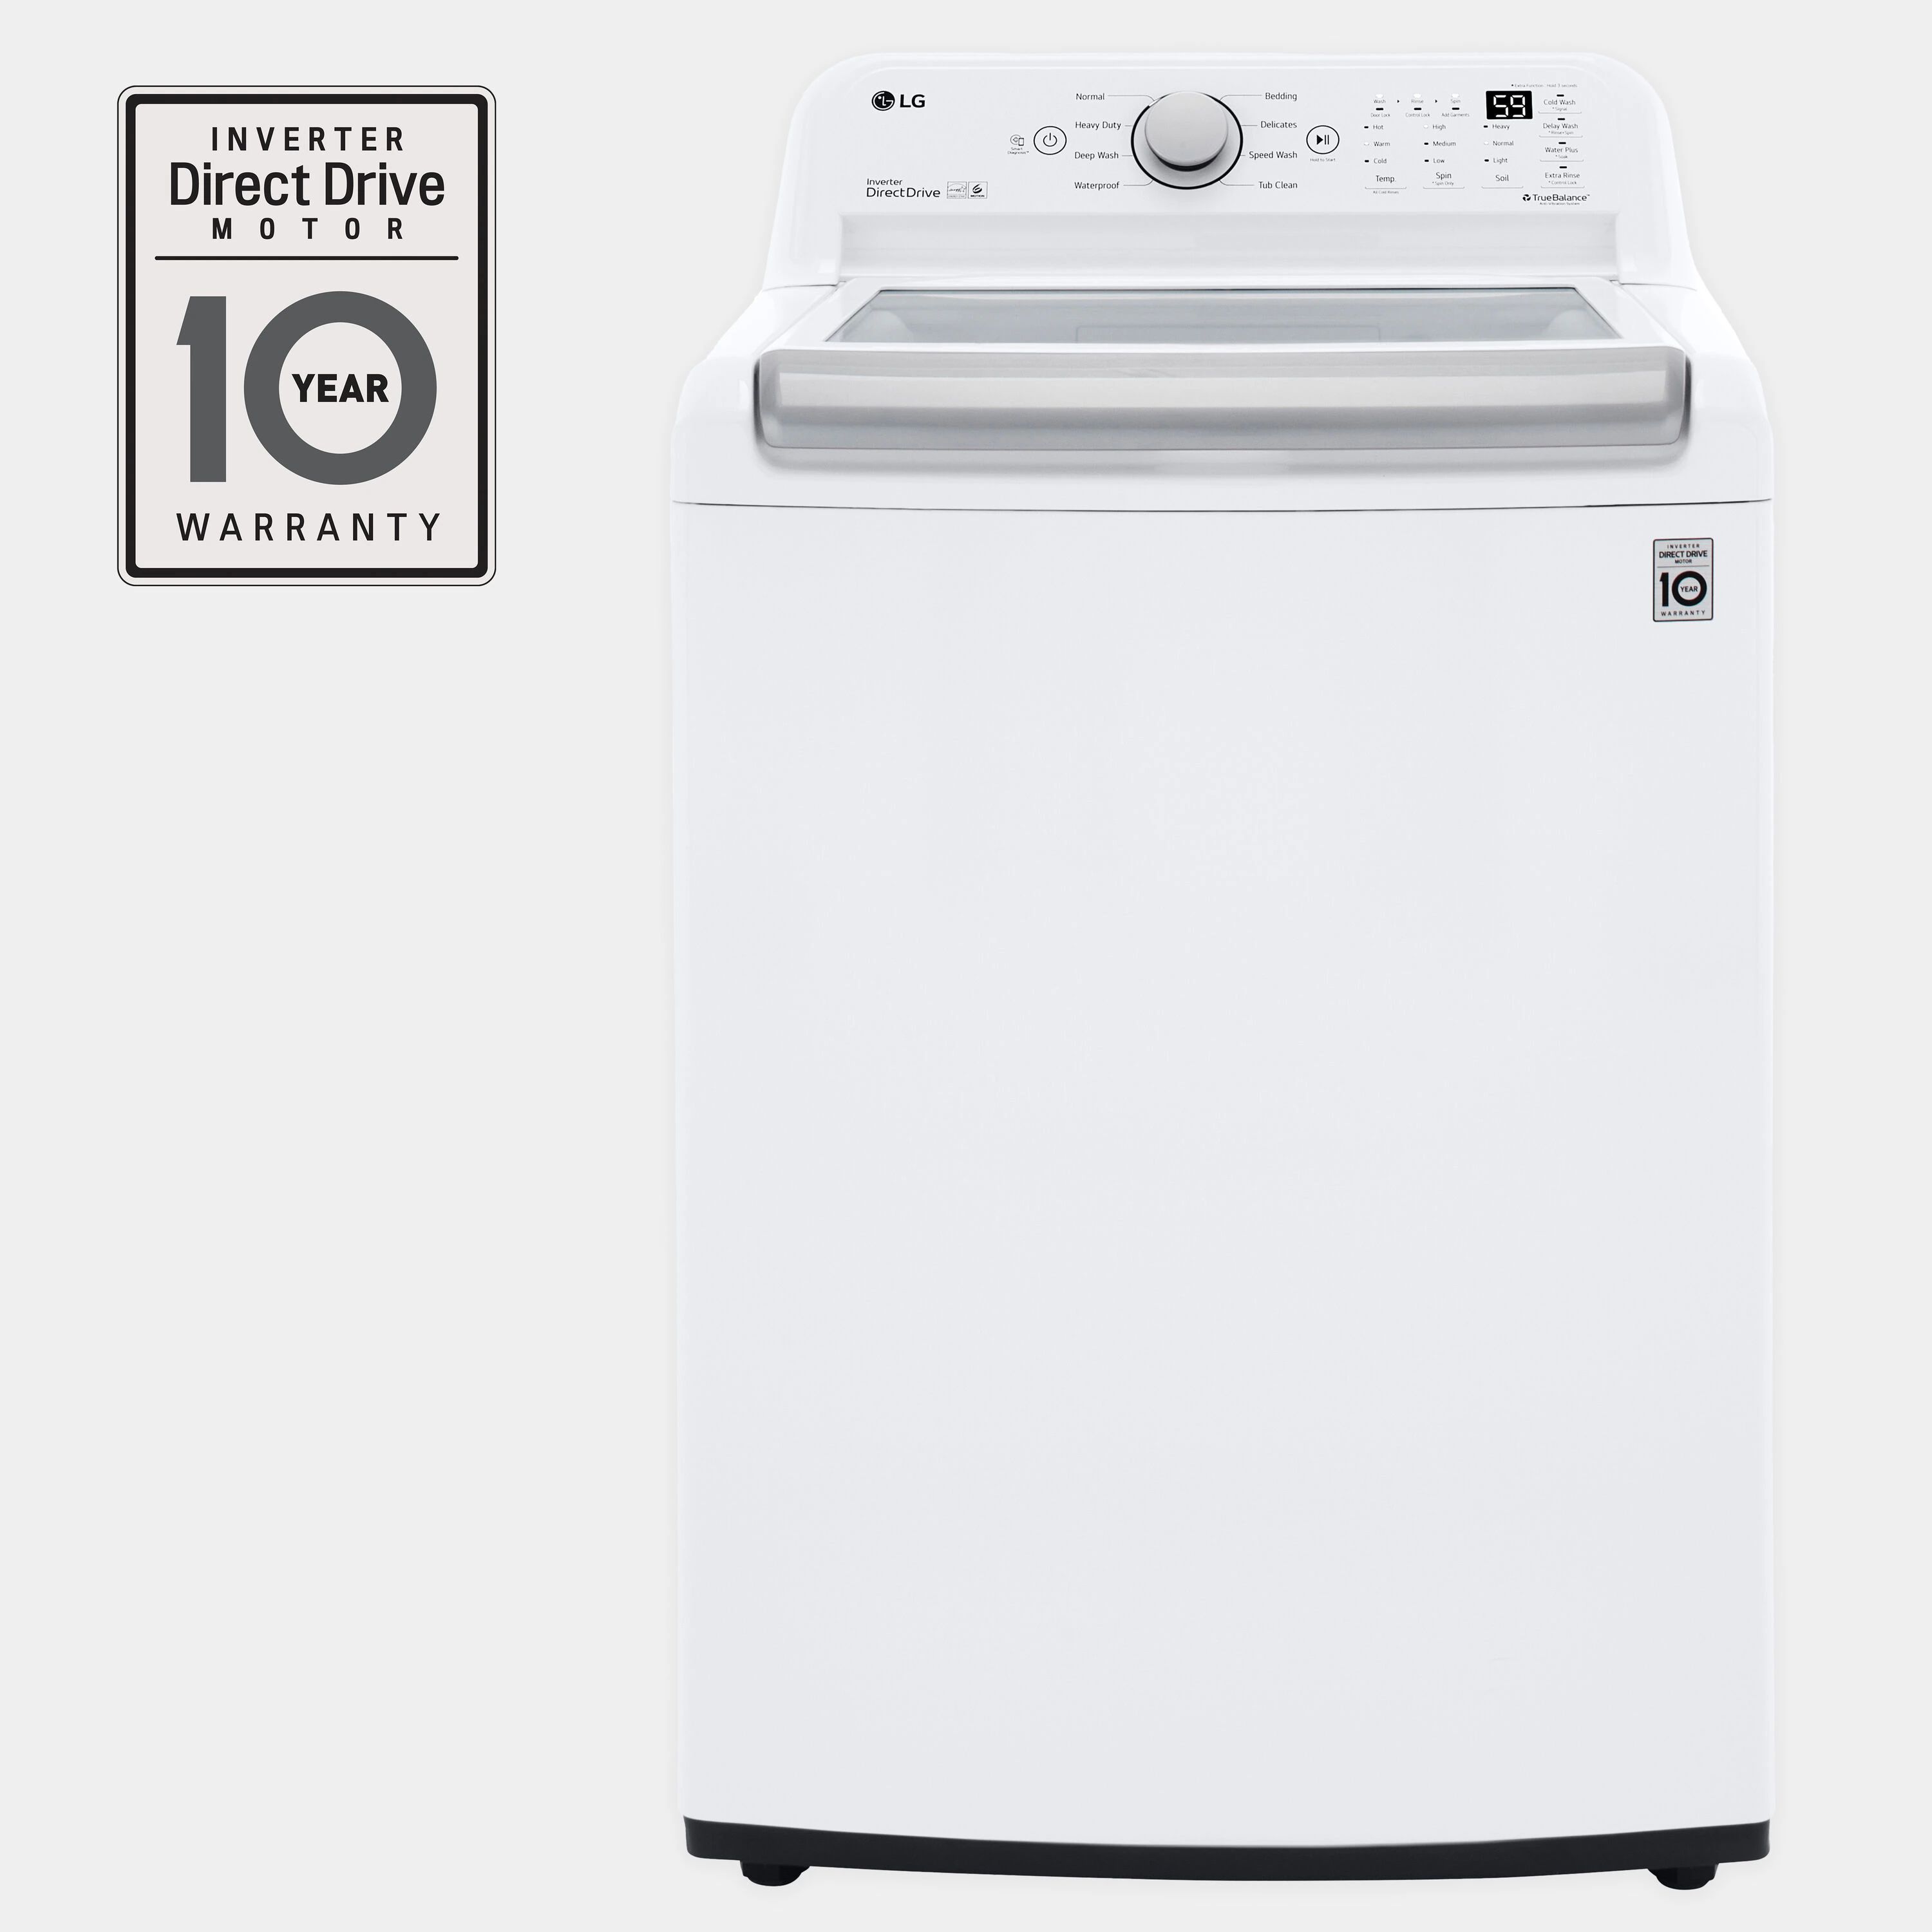 LG ColdWash 5-cu ft High Efficiency Impeller Top-Load Washer (White) ENERGY STAR | Lowe's